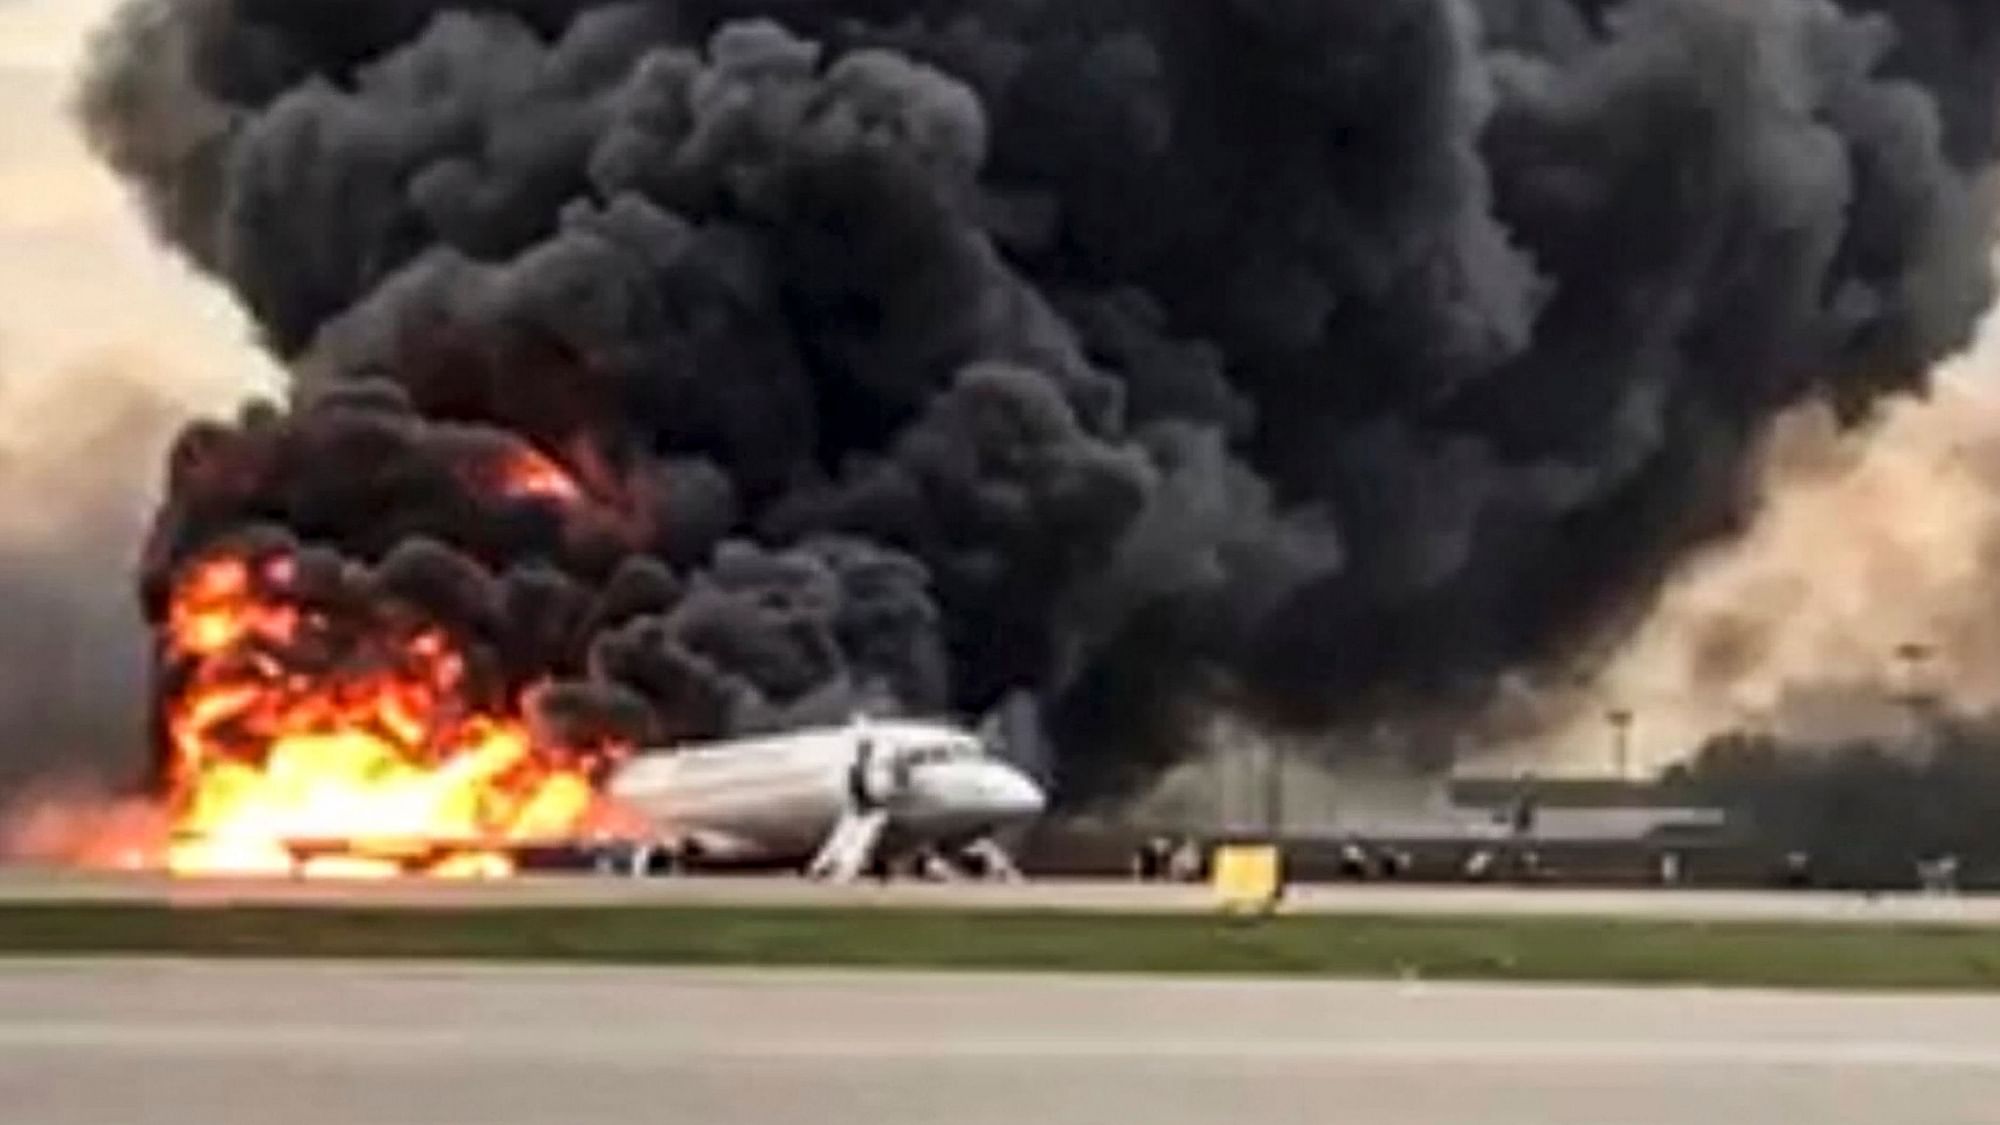 The image shows the Sukhoi SSJ100 aircraft of Aeroflot Airlines on fire.